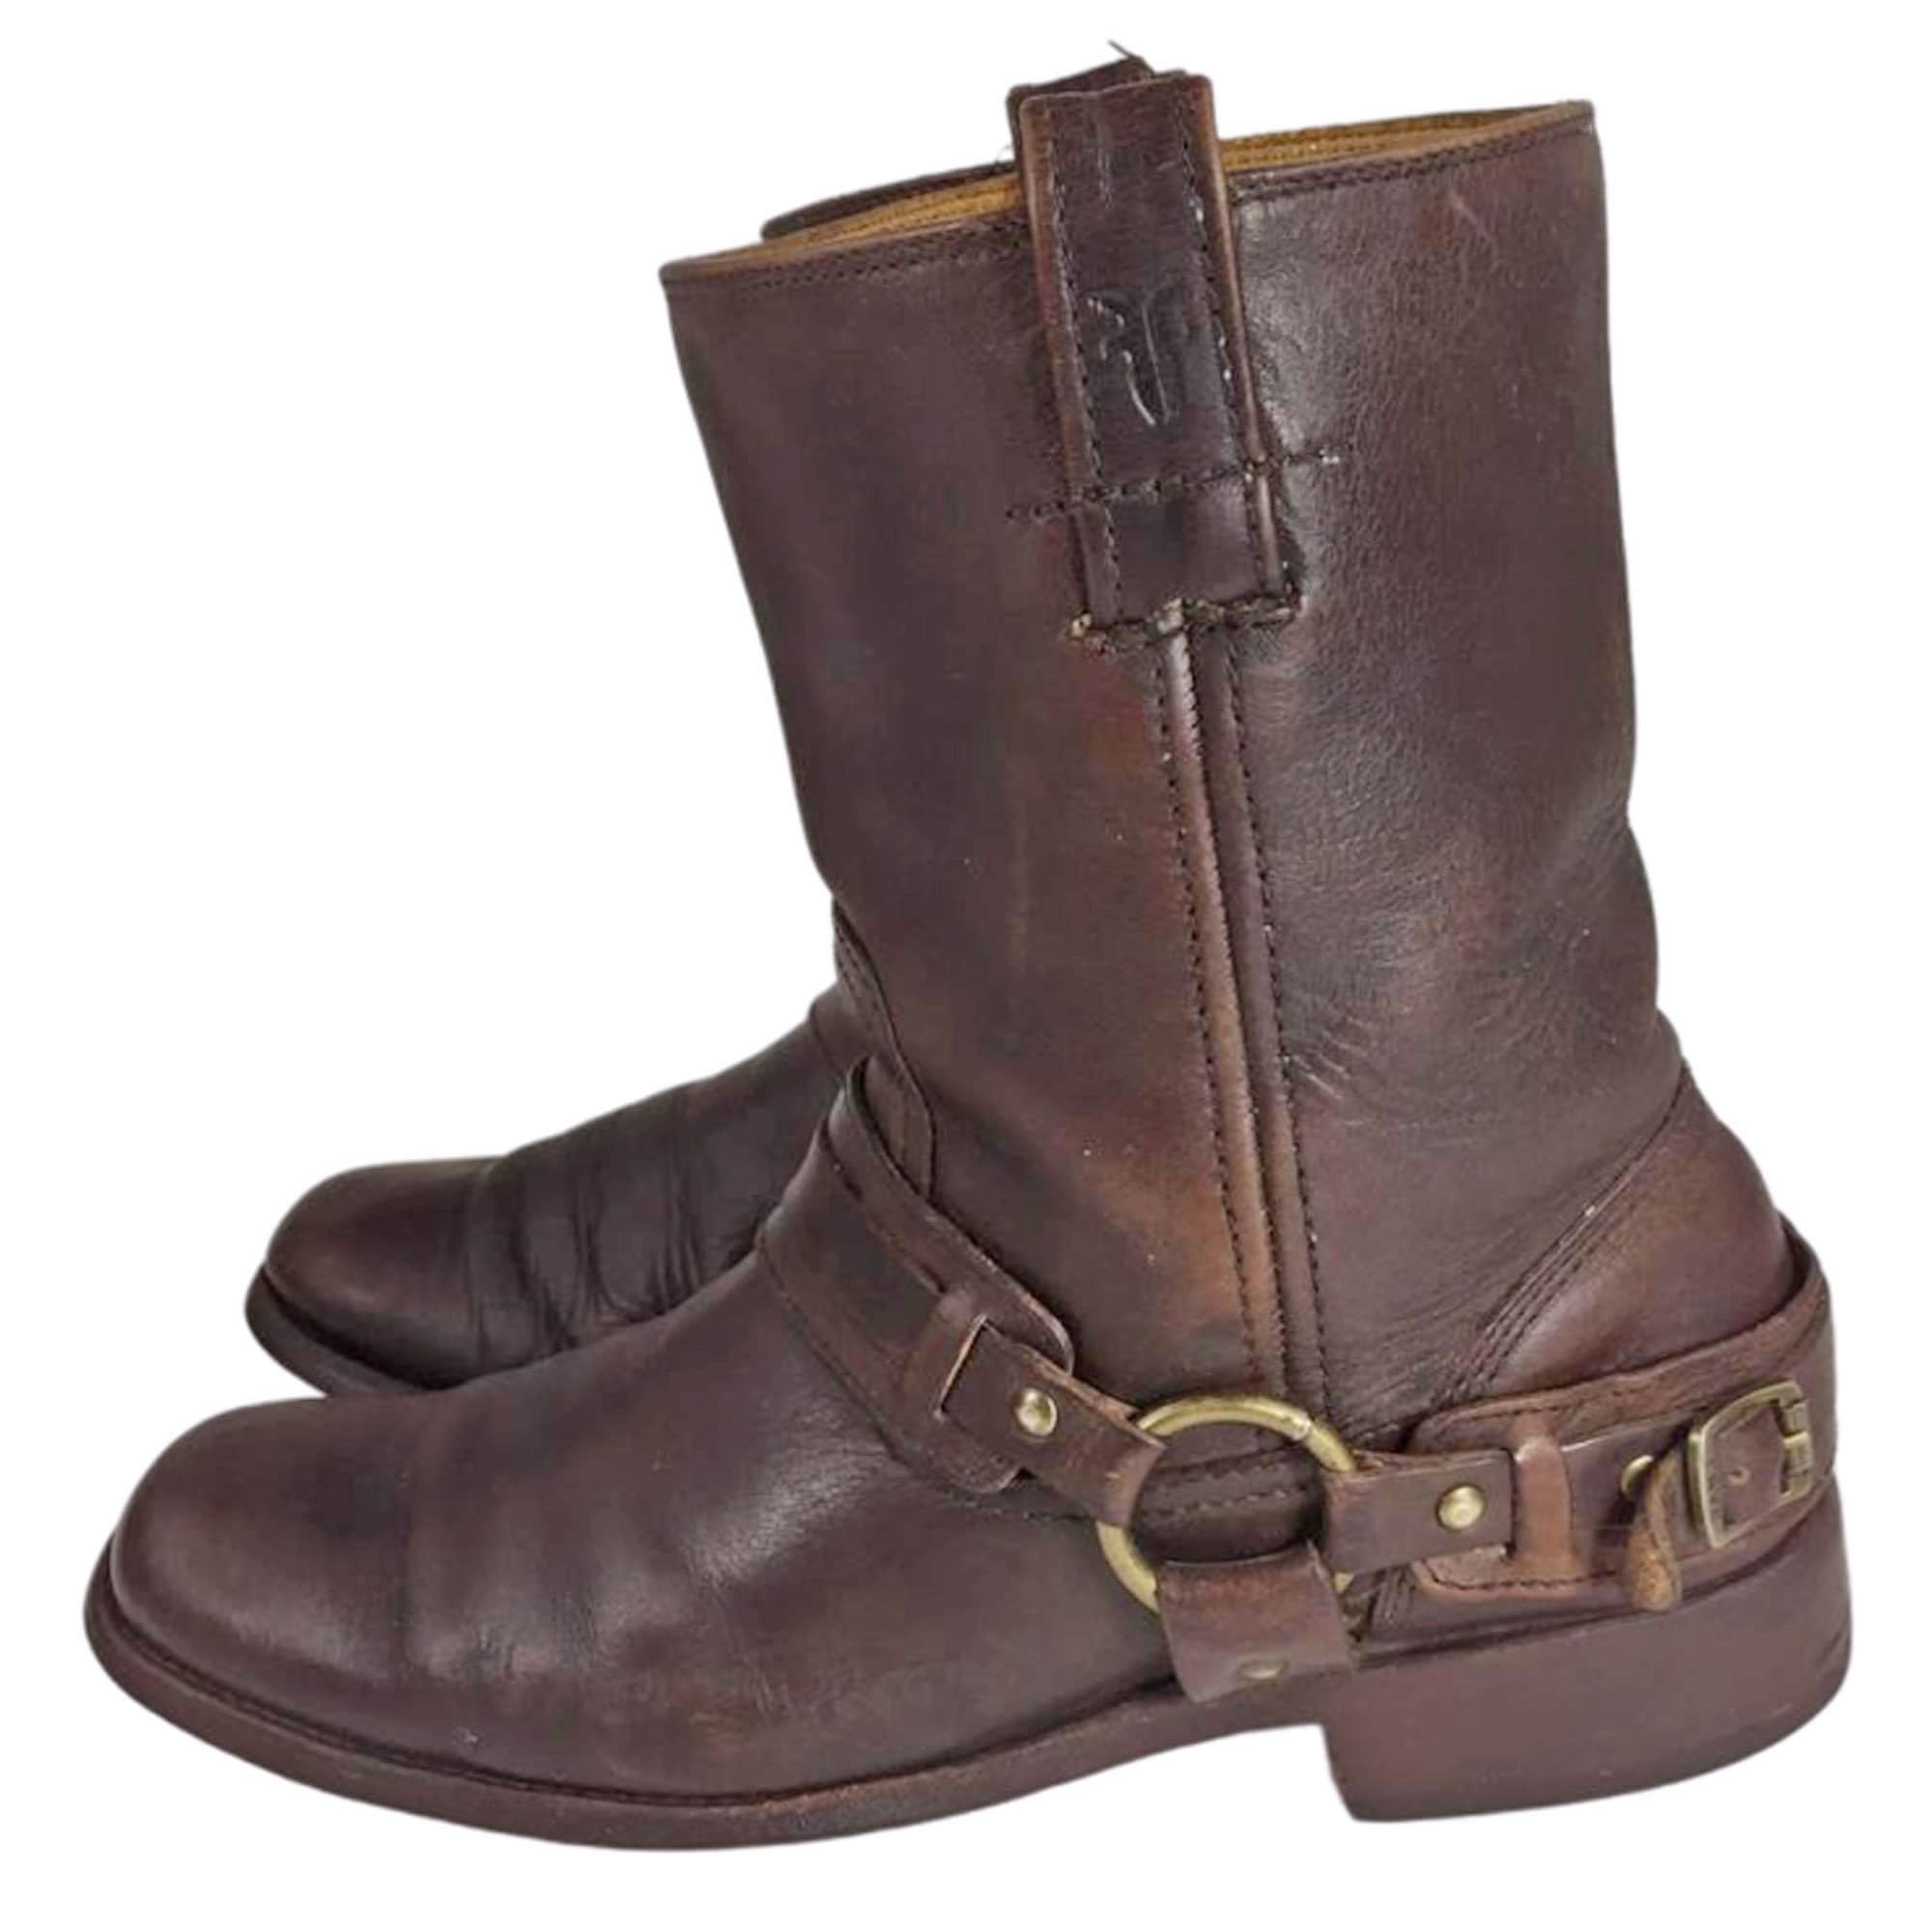 FRYE 87465 JESSE HARNESS Brown Leather Motorcycle Boots - Etsy